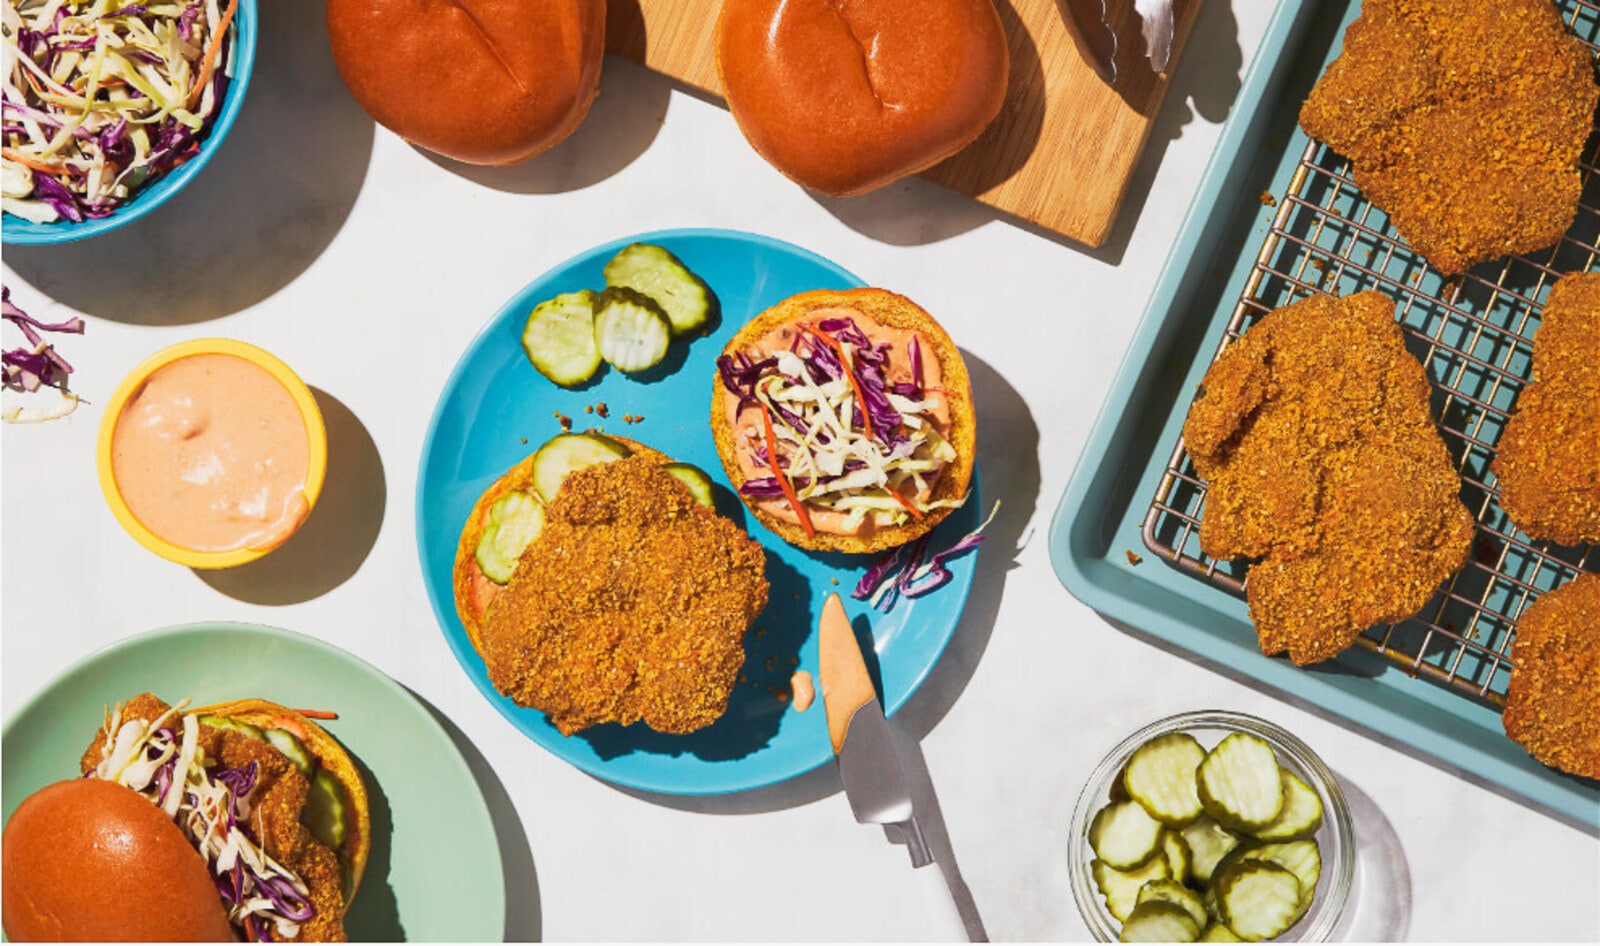 This Former Popeyes Chef Is Now Making Vegan Fried Chicken